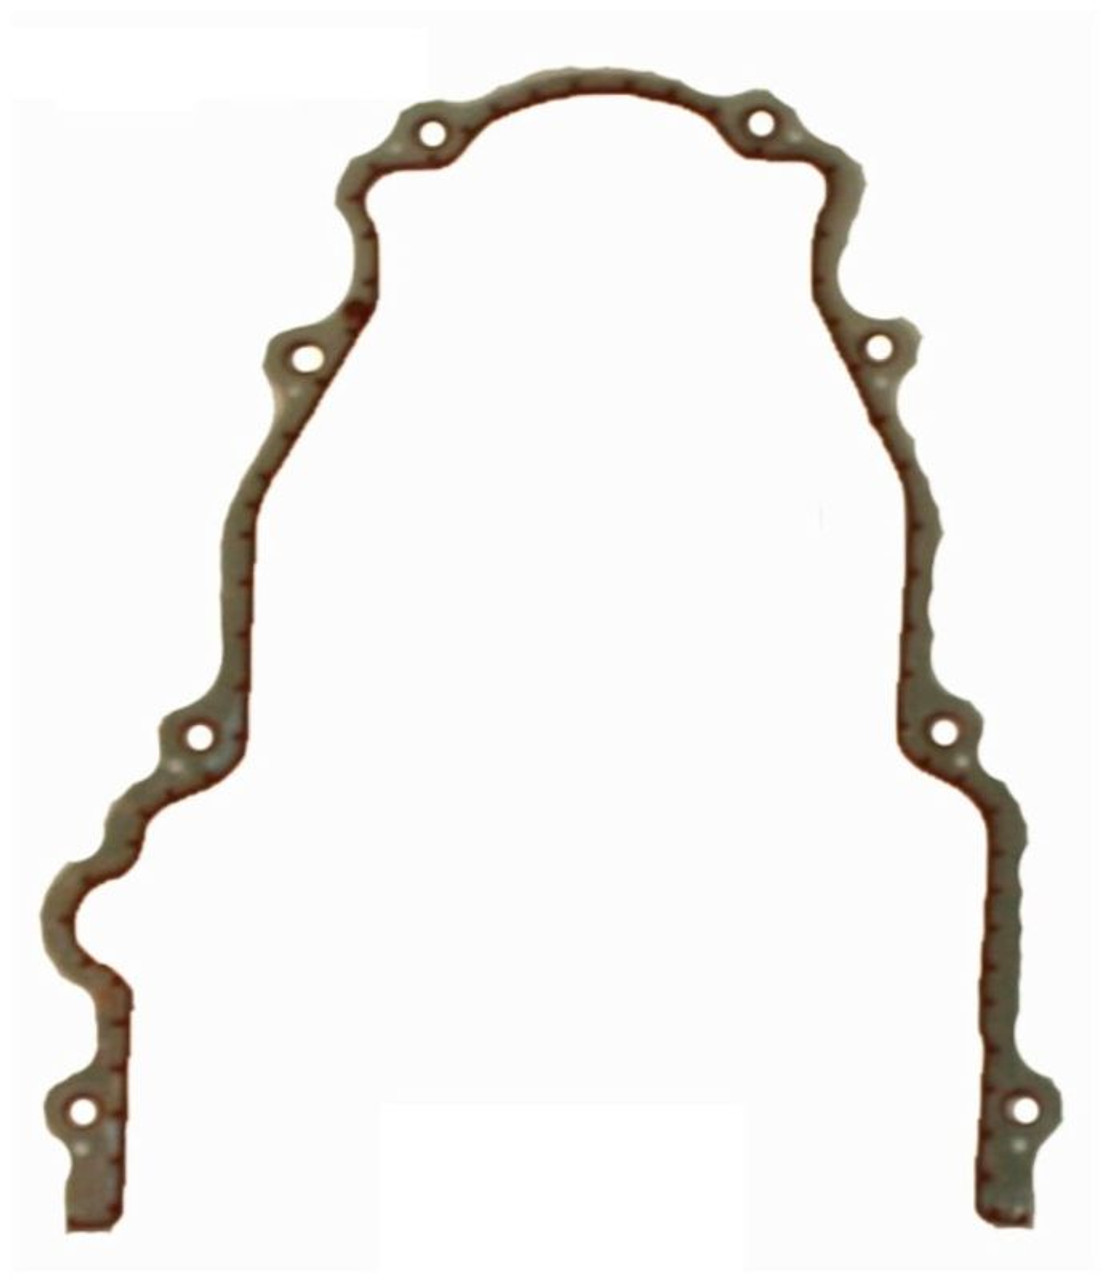 2009 GMC Envoy 5.3L Engine Timing Cover Gasket TCG293-A -591